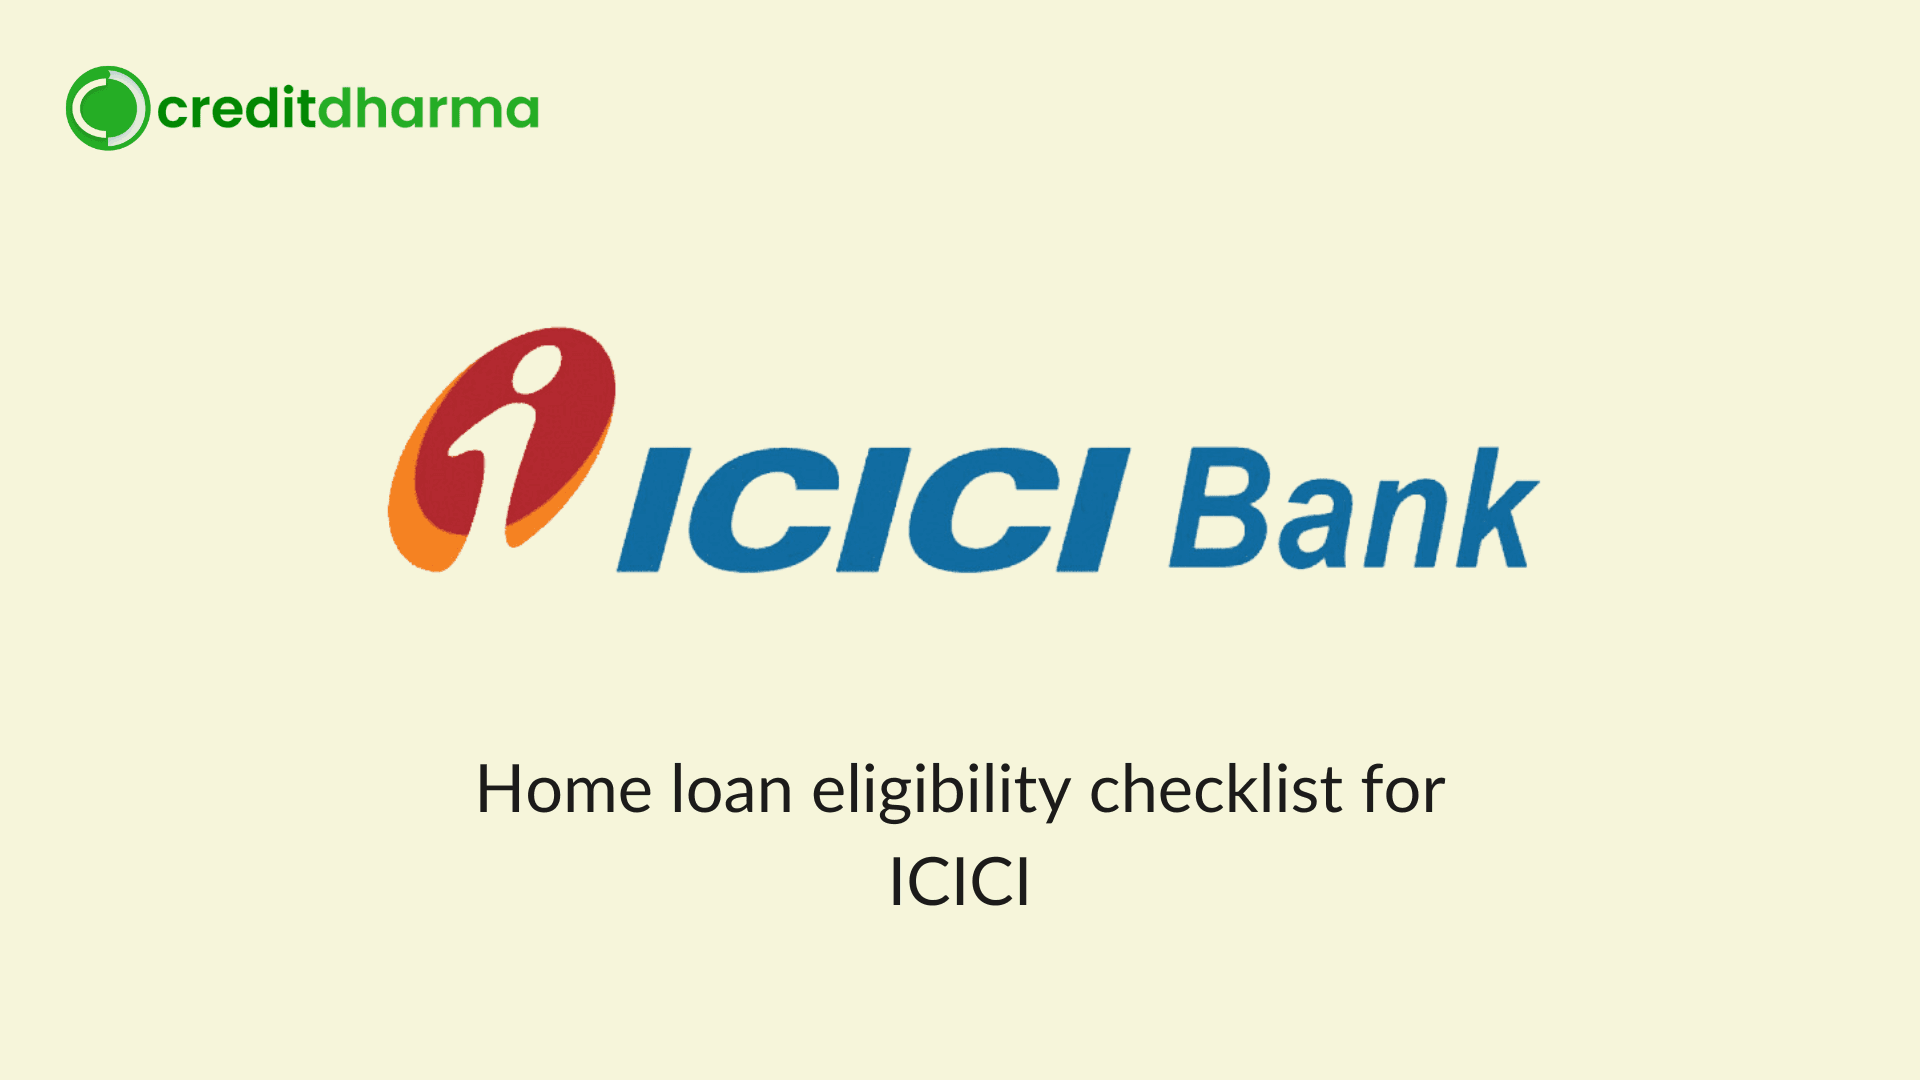 Cover Image for Home loan eligibility checklist for ICICI